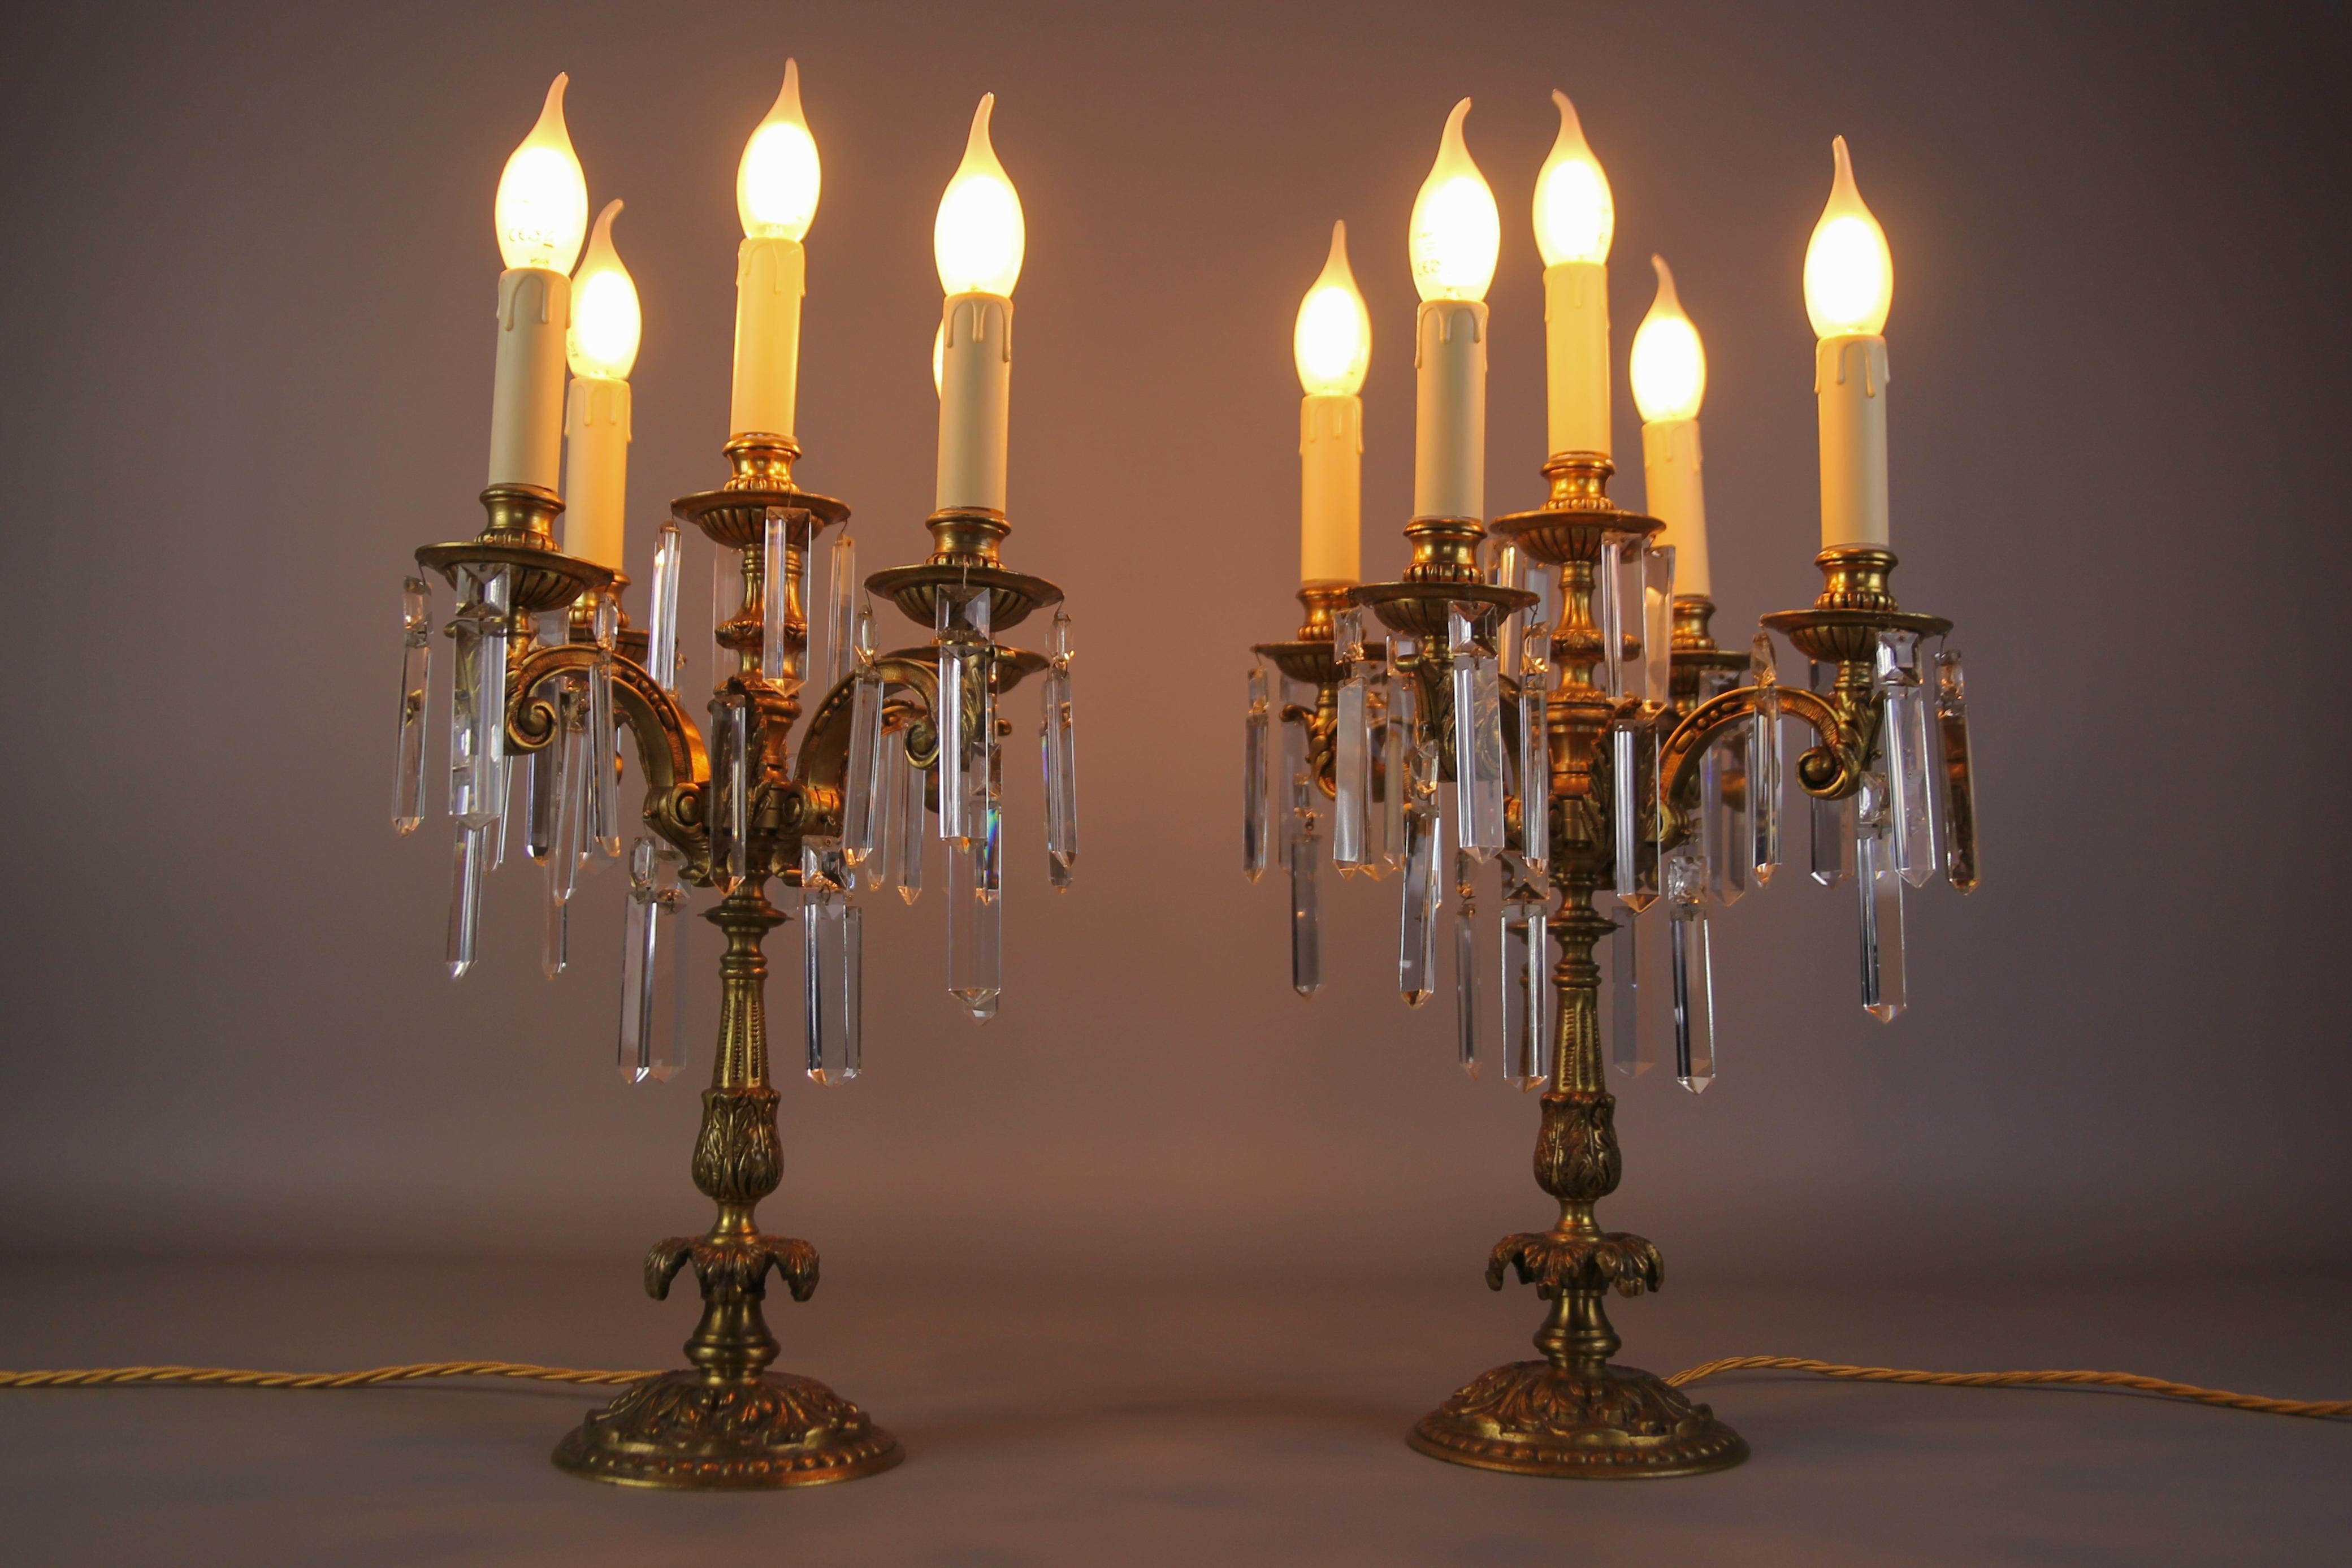 Pair of French Louis XVI style bronze and crystal candelabra table lamps. These impressive table lamps feature five bronze arms, embellished with hanging cut crystal prisms that reflect the light of elegance and glamorous beauty. Each lamp has five